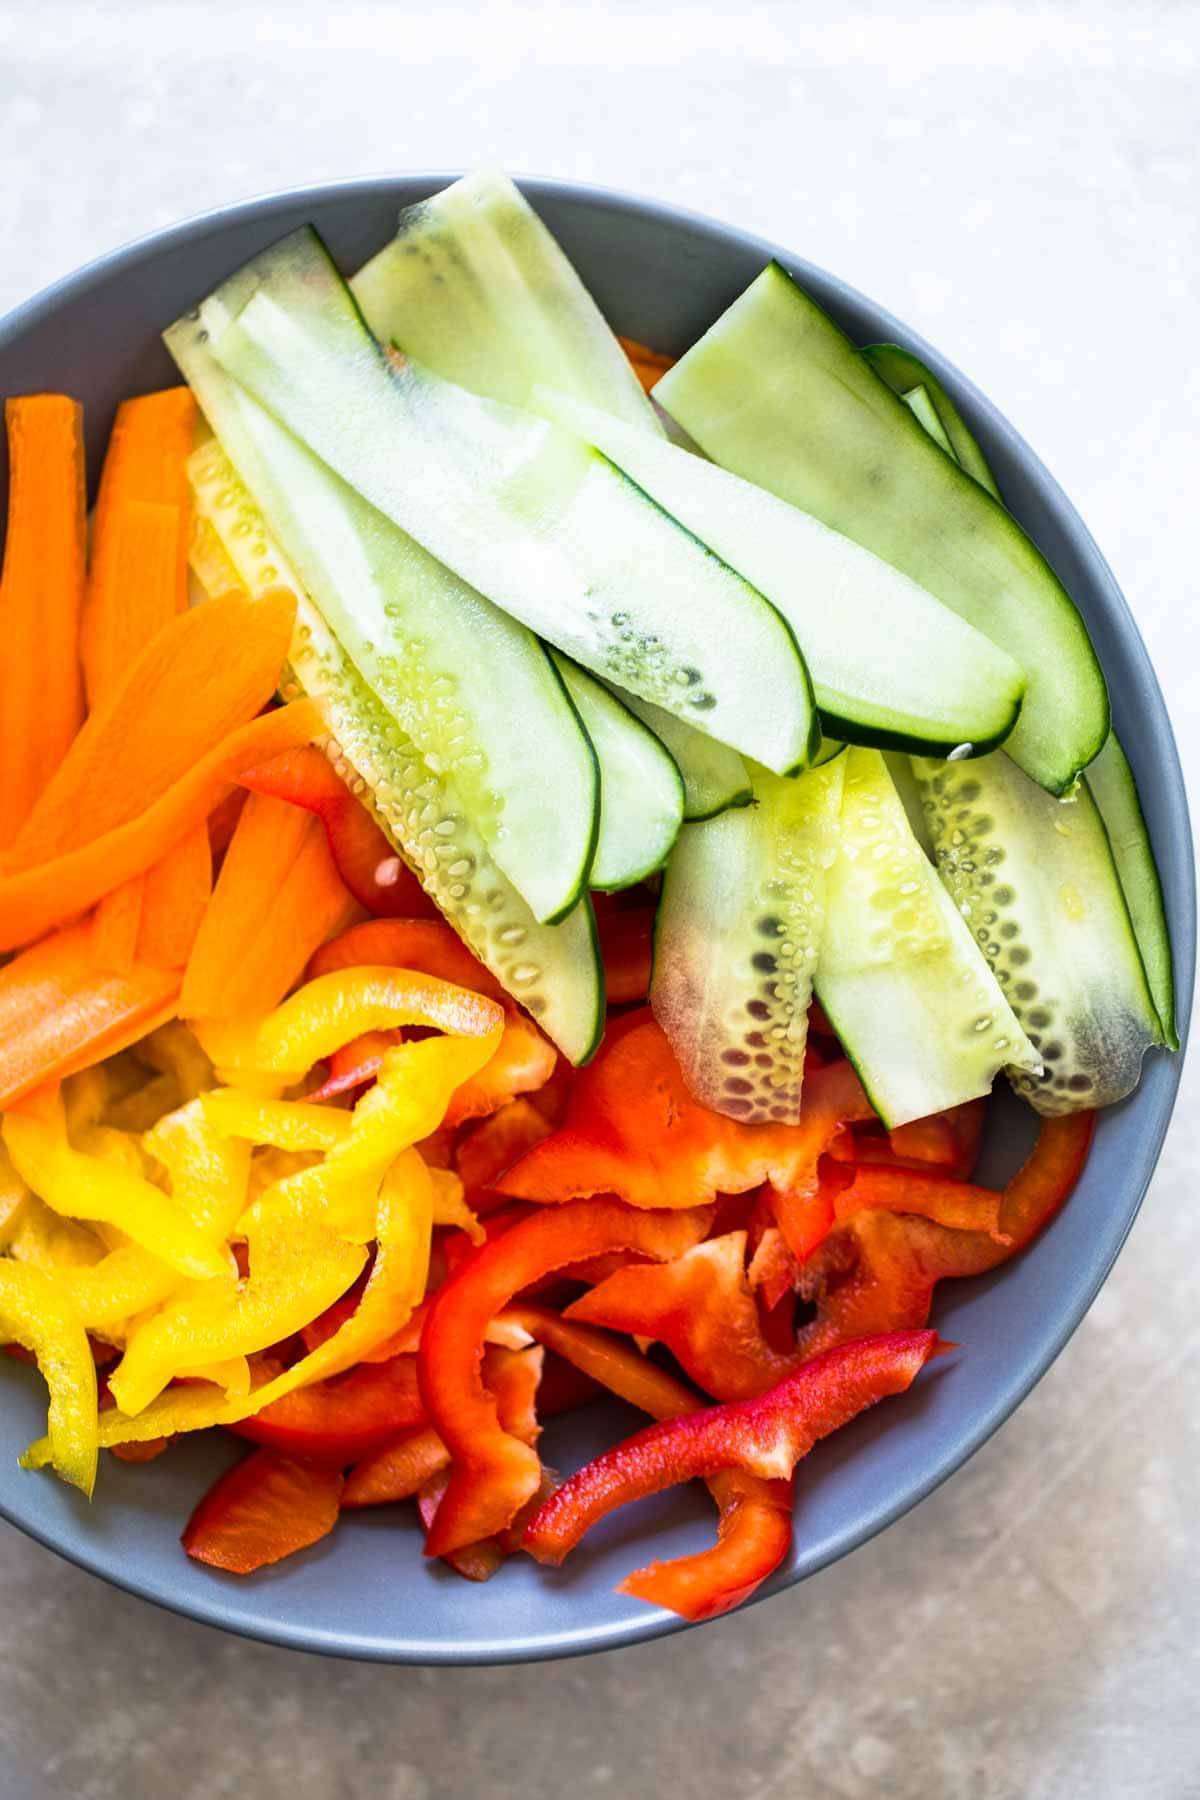 Cucumbers, peppers, and carrots in a bowl.